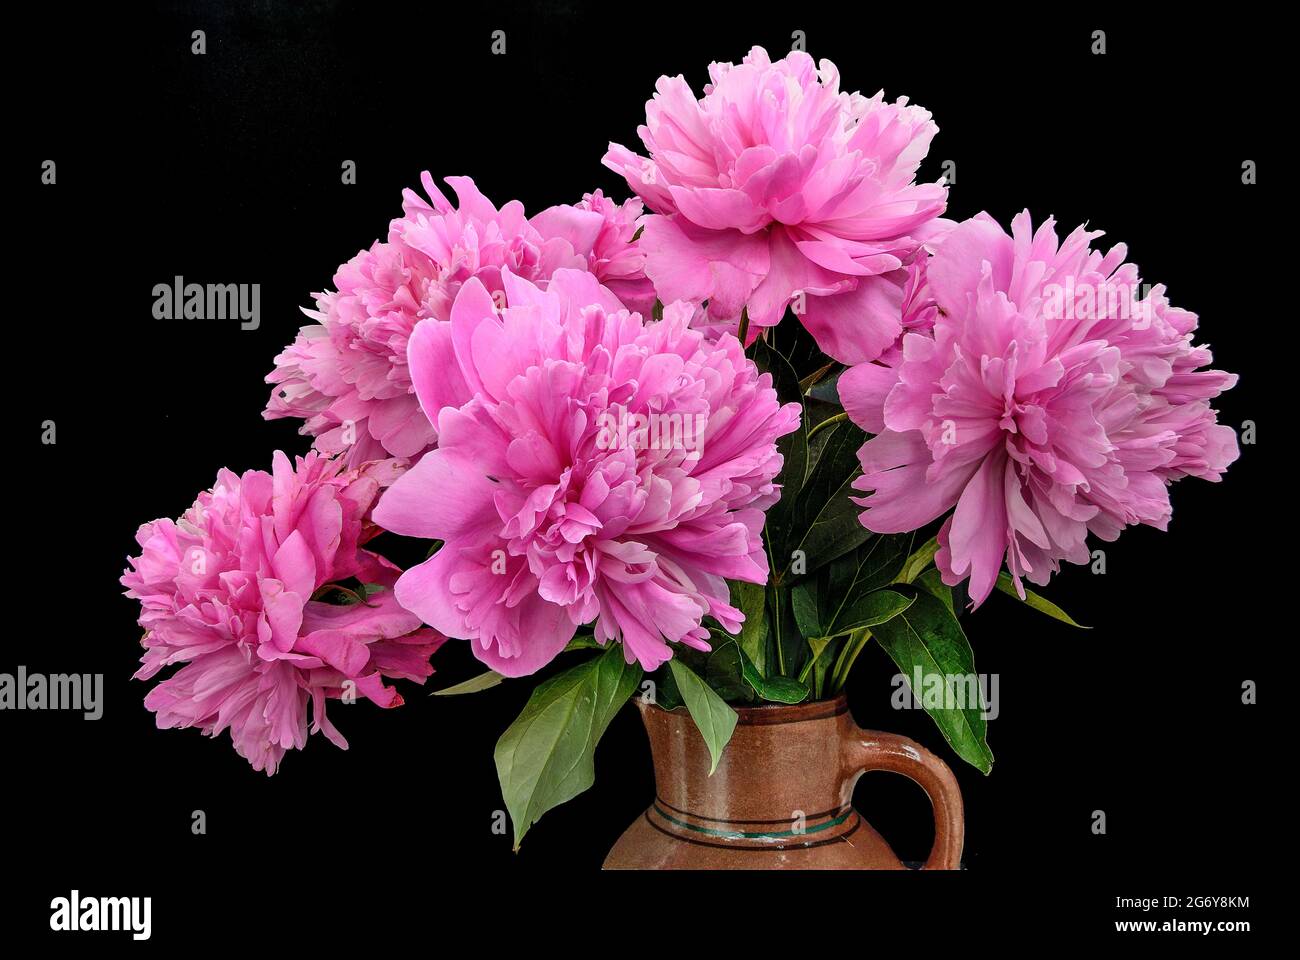 Bouquet of pink peonies  with green leaves close up on black  background isolated. Natural floral design, beauty of gentle flowers Stock Photo